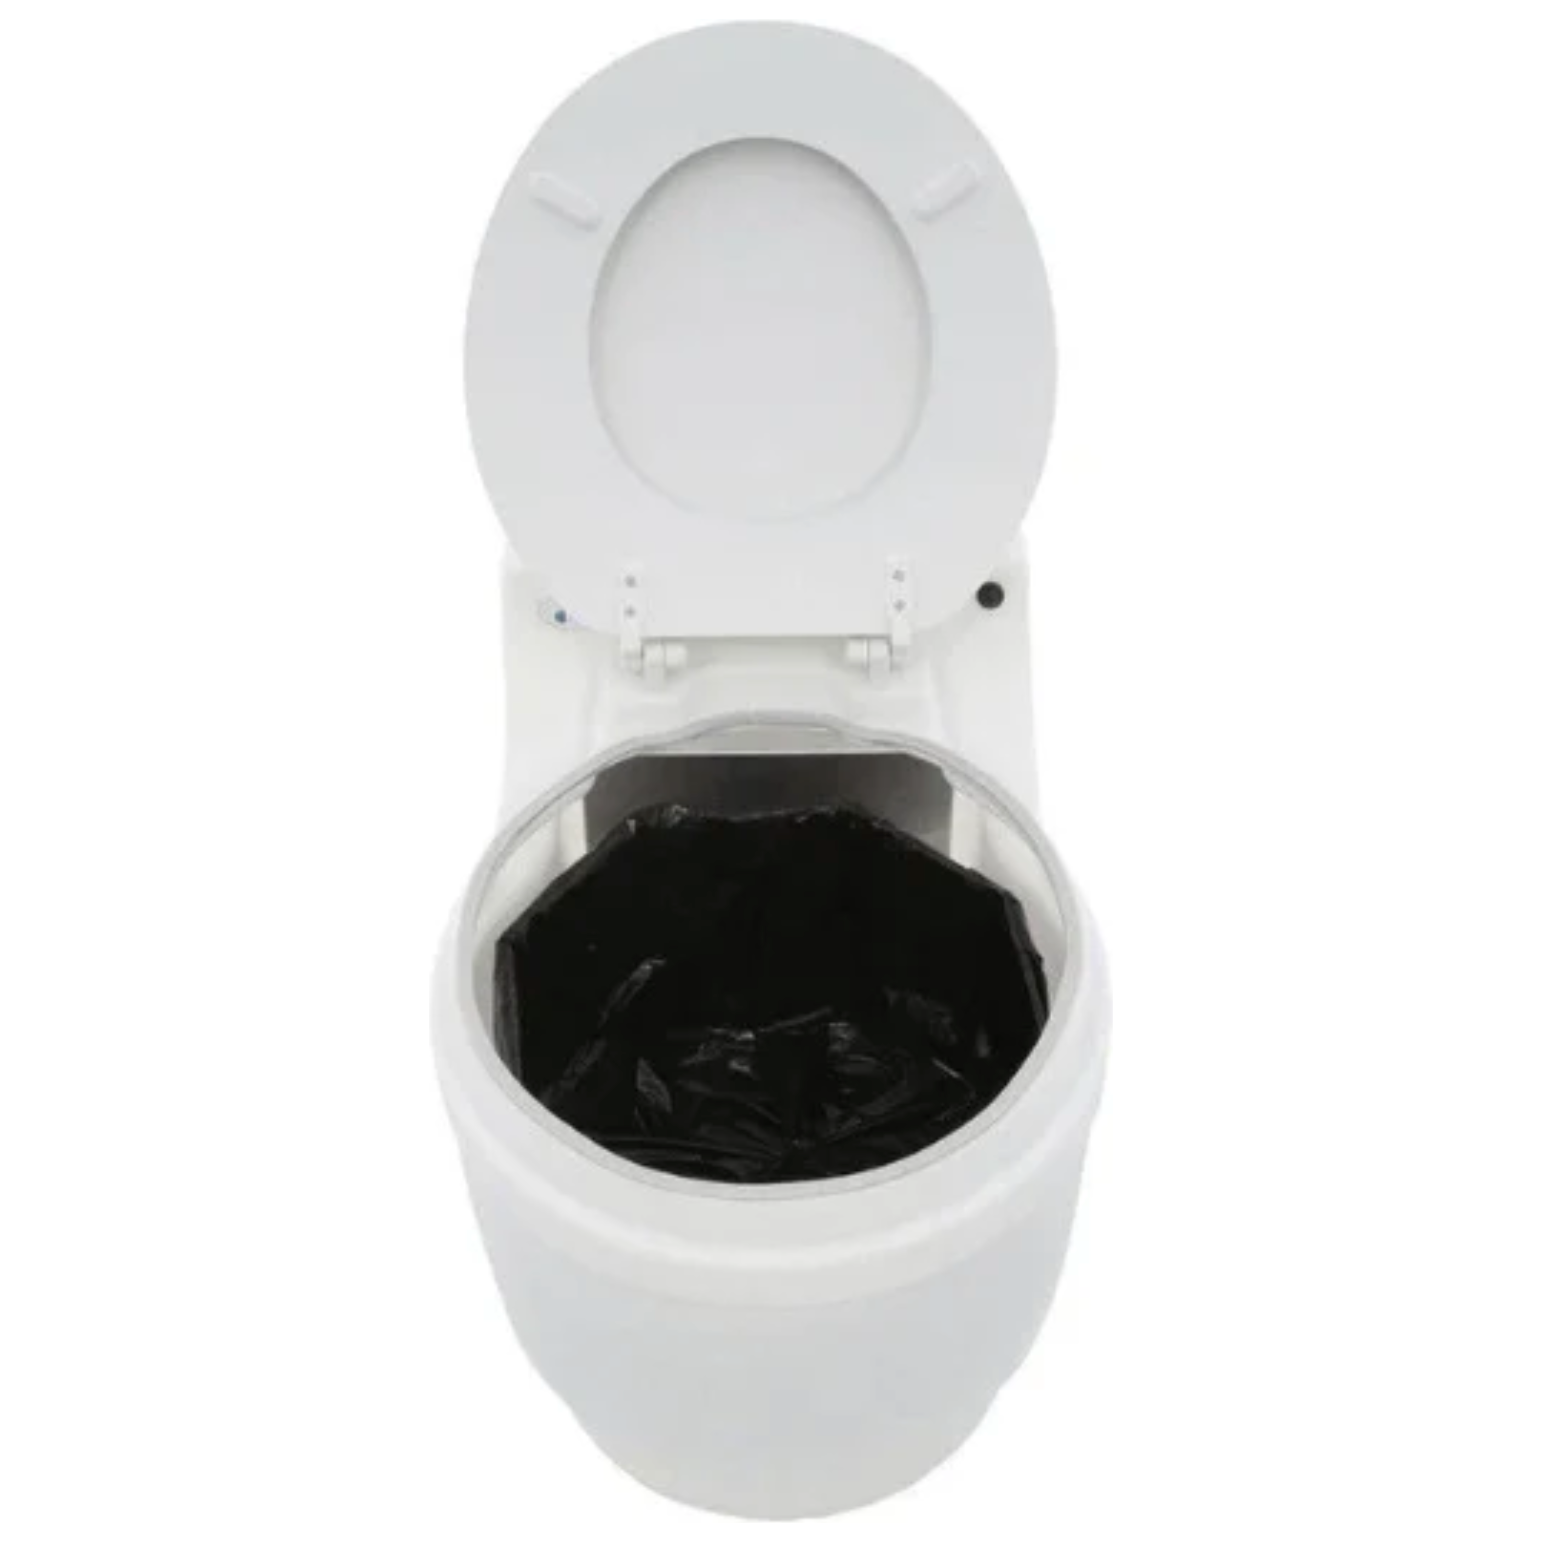 Laveo Dry Flush Portable Electric Waterless Toilet with with Car Adapter Plug 12V DF1045DC